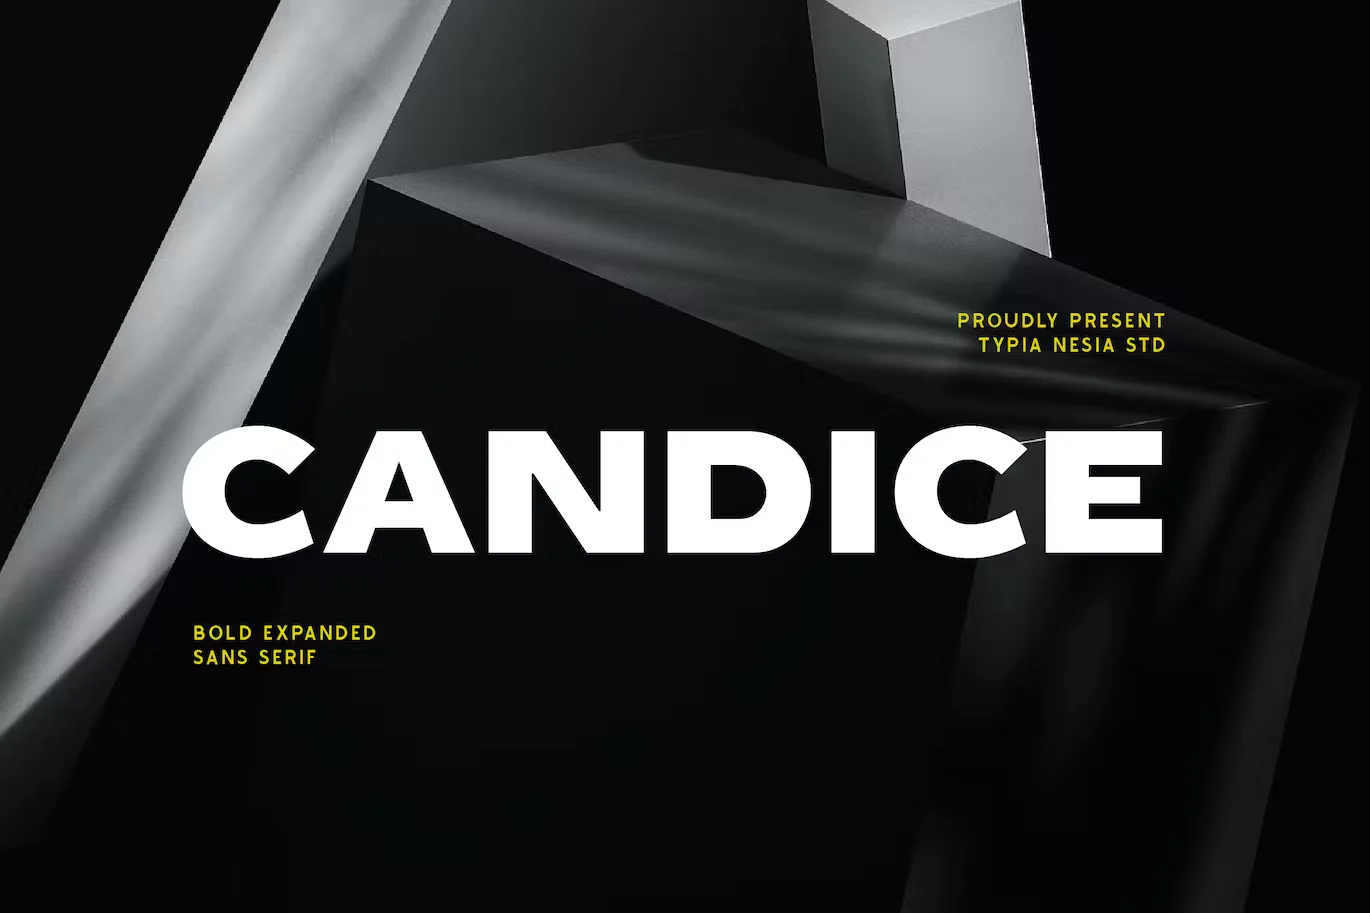 Candice - Heavy Bold Expanded Display Game Sans